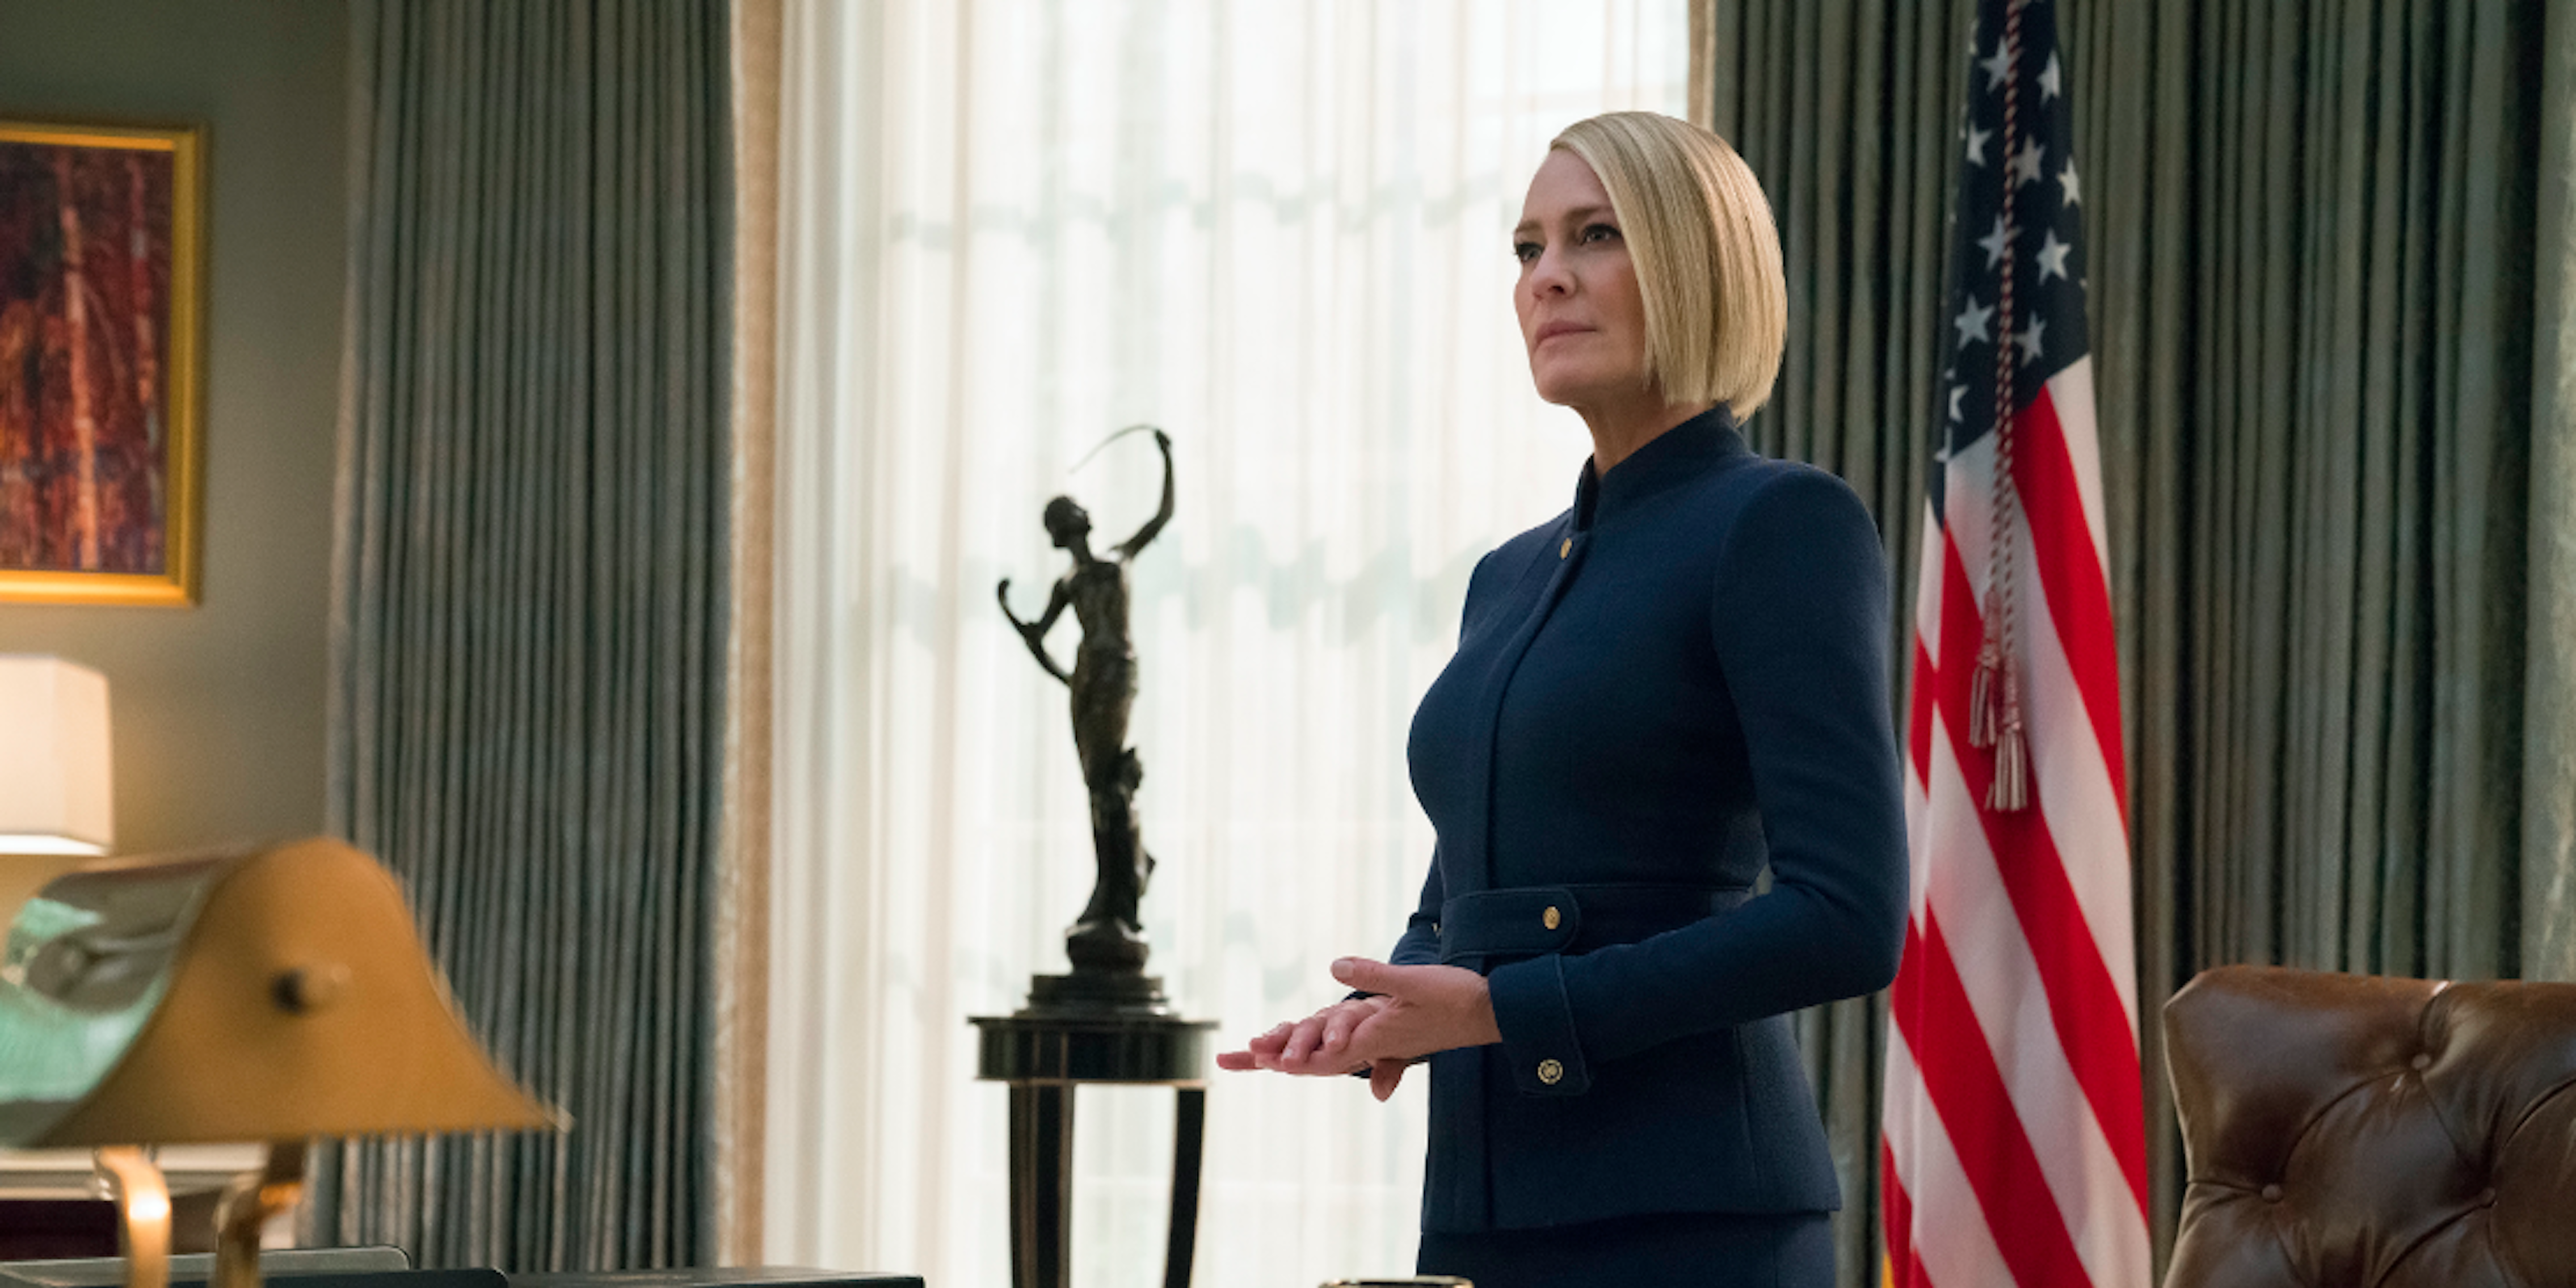 Netflix - House of Cards season 6 review